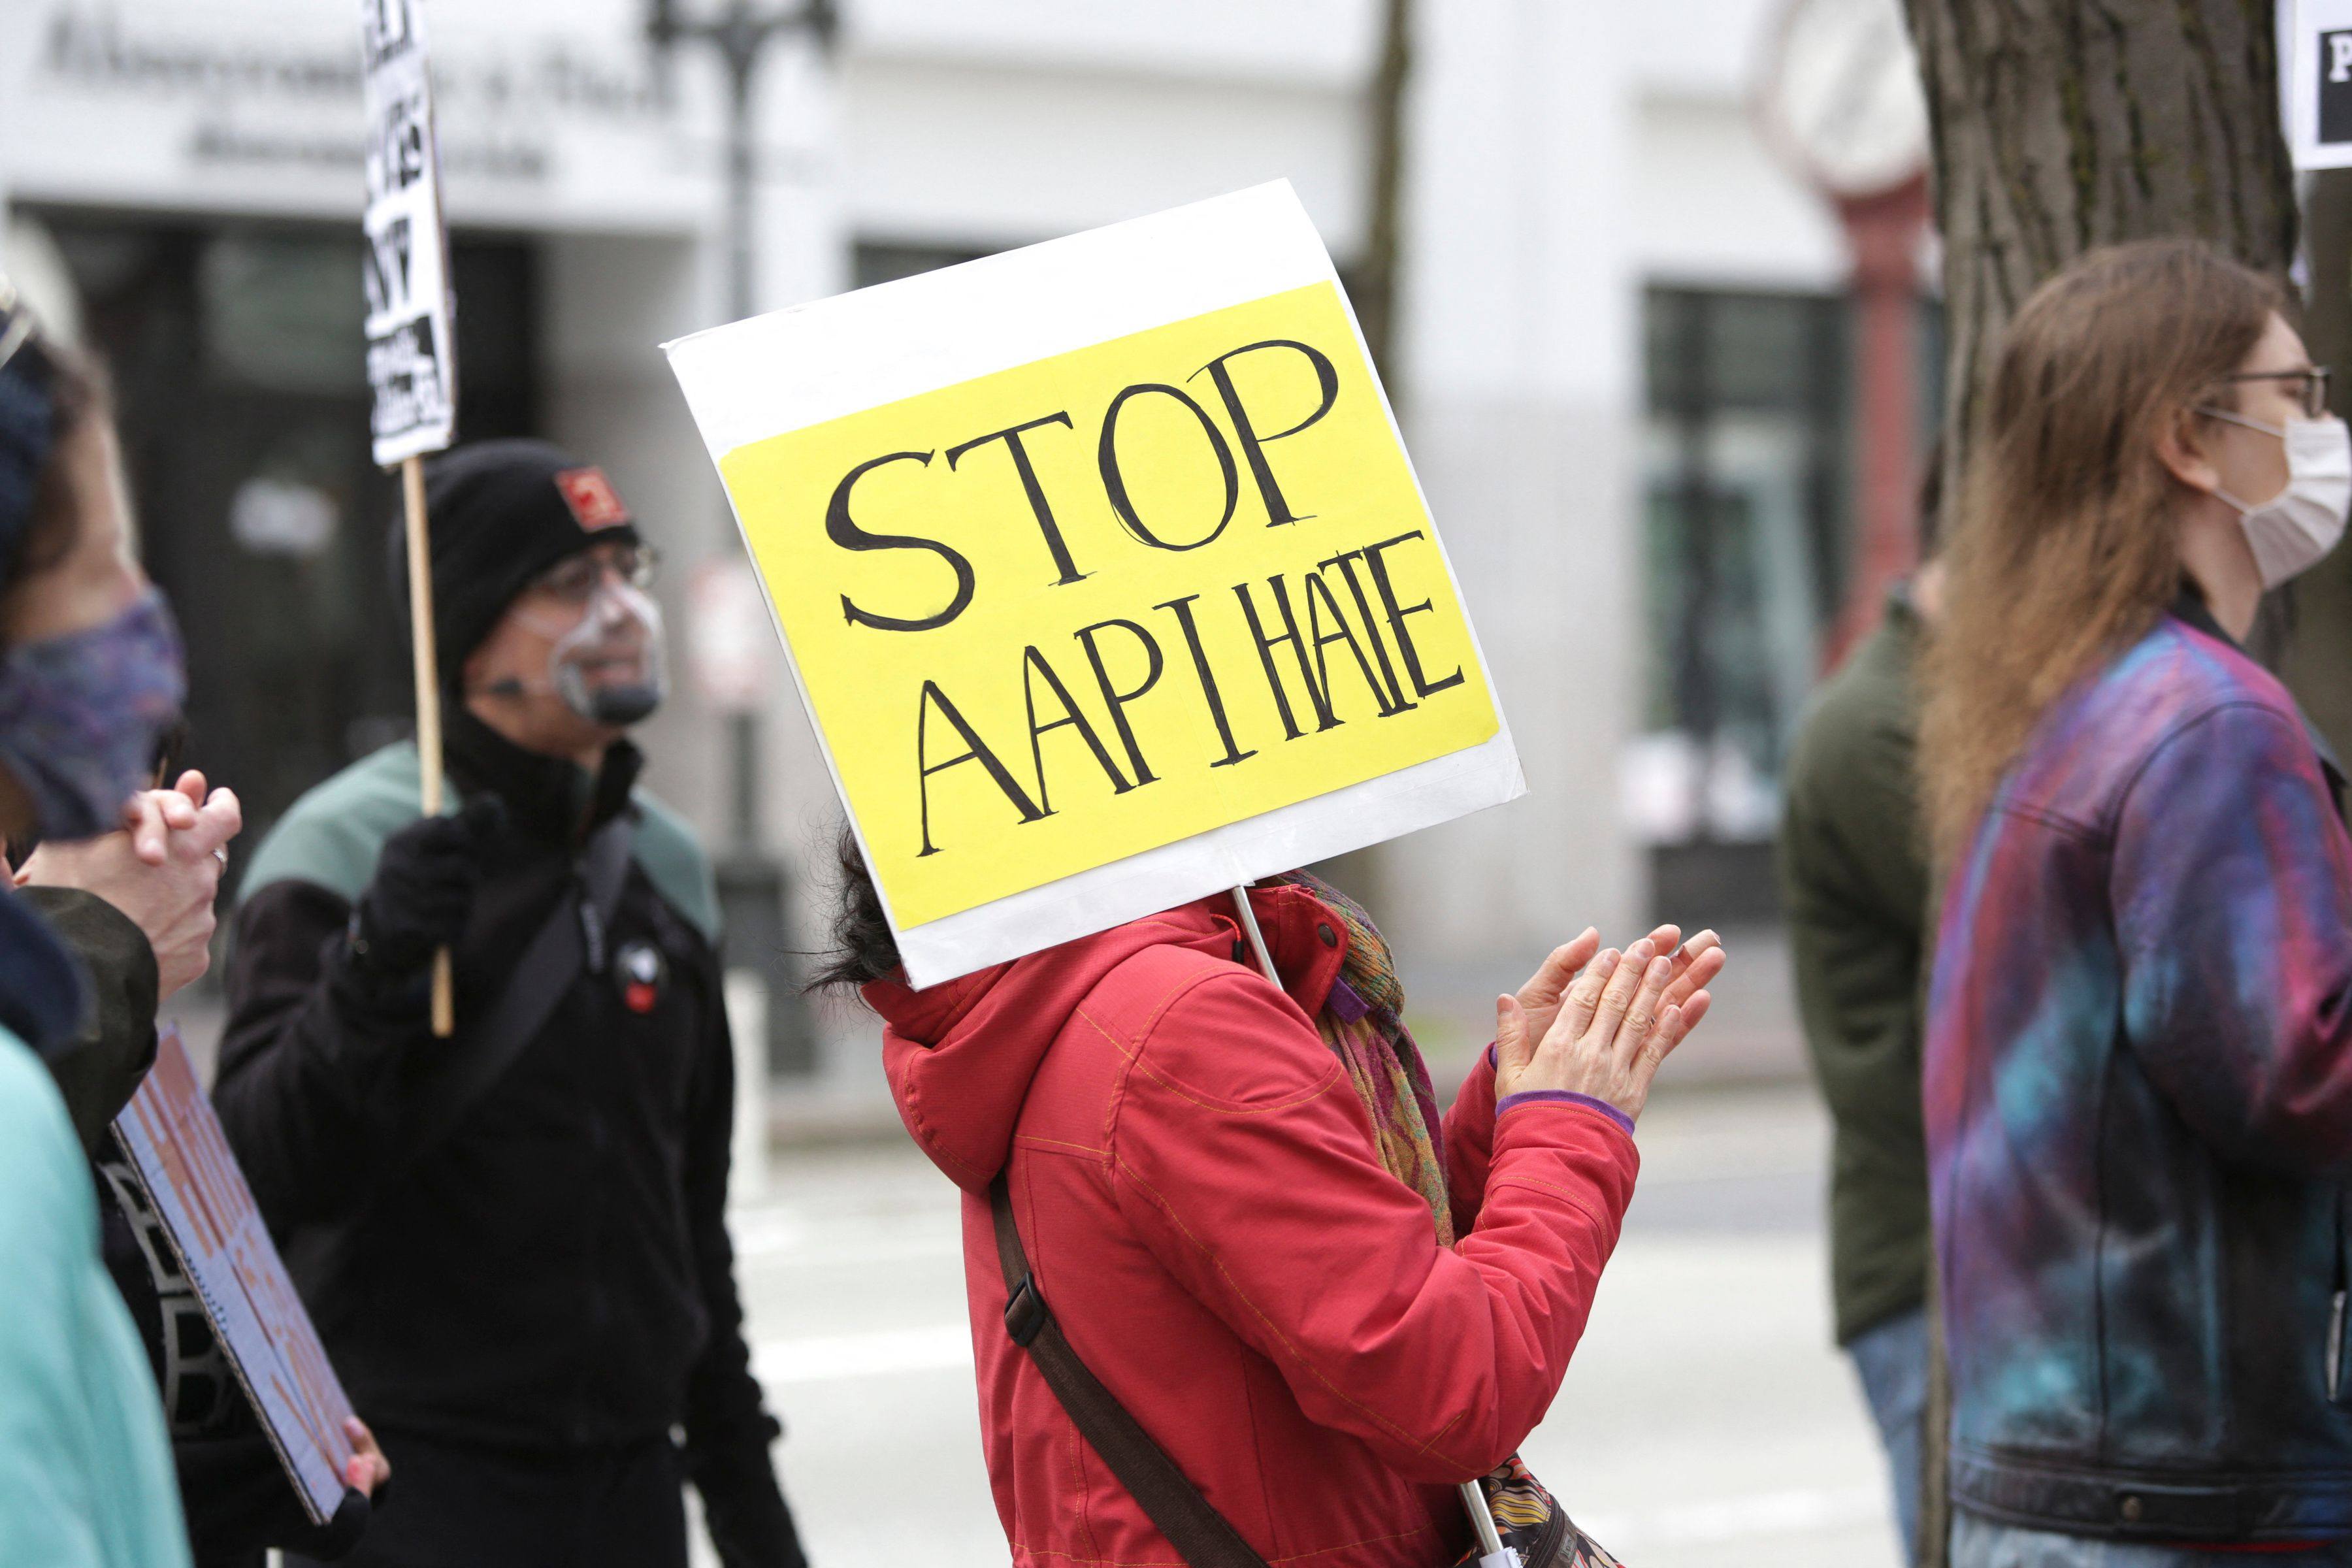 A demonstrator holds a sign calling for a end to hate against AAPI, or Asian-Americans and Pacific Islanders, in Seattle, Washington, in March 2021. Photo: AFP